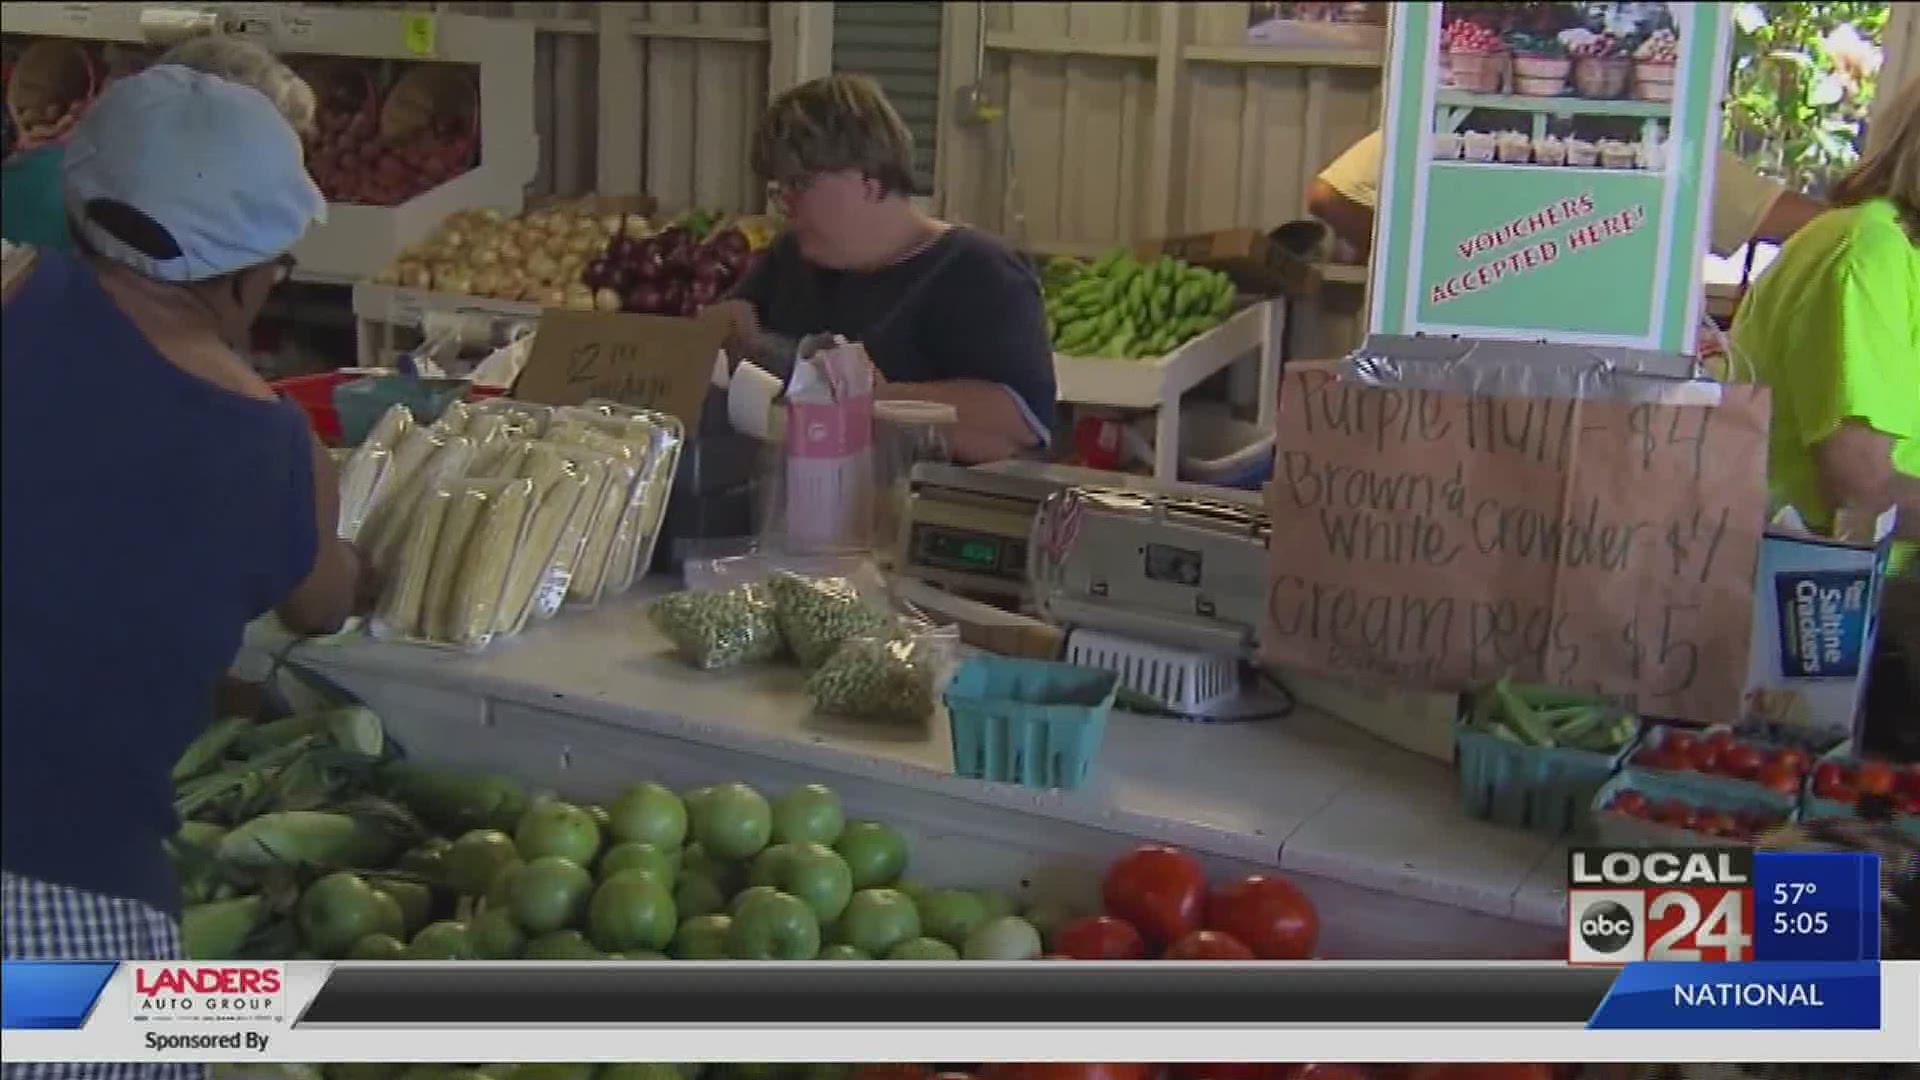 The Agricenter Farmer's Market will open for three days with a lower capacity and safety changes.